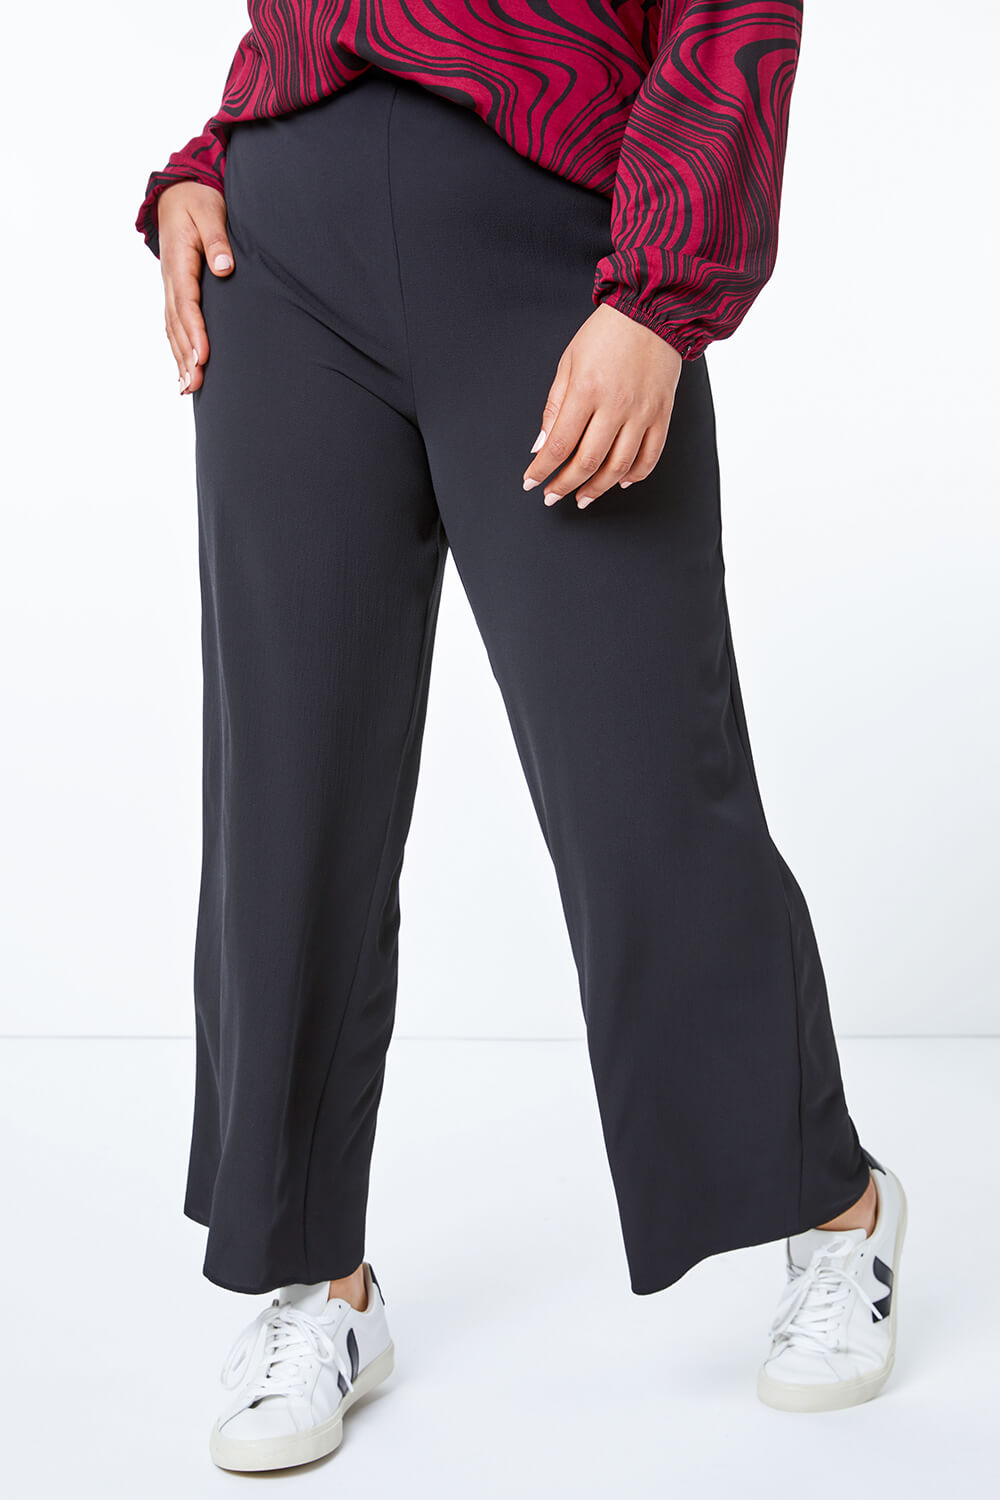 Black Curve Wide Leg Trousers, Image 4 of 4